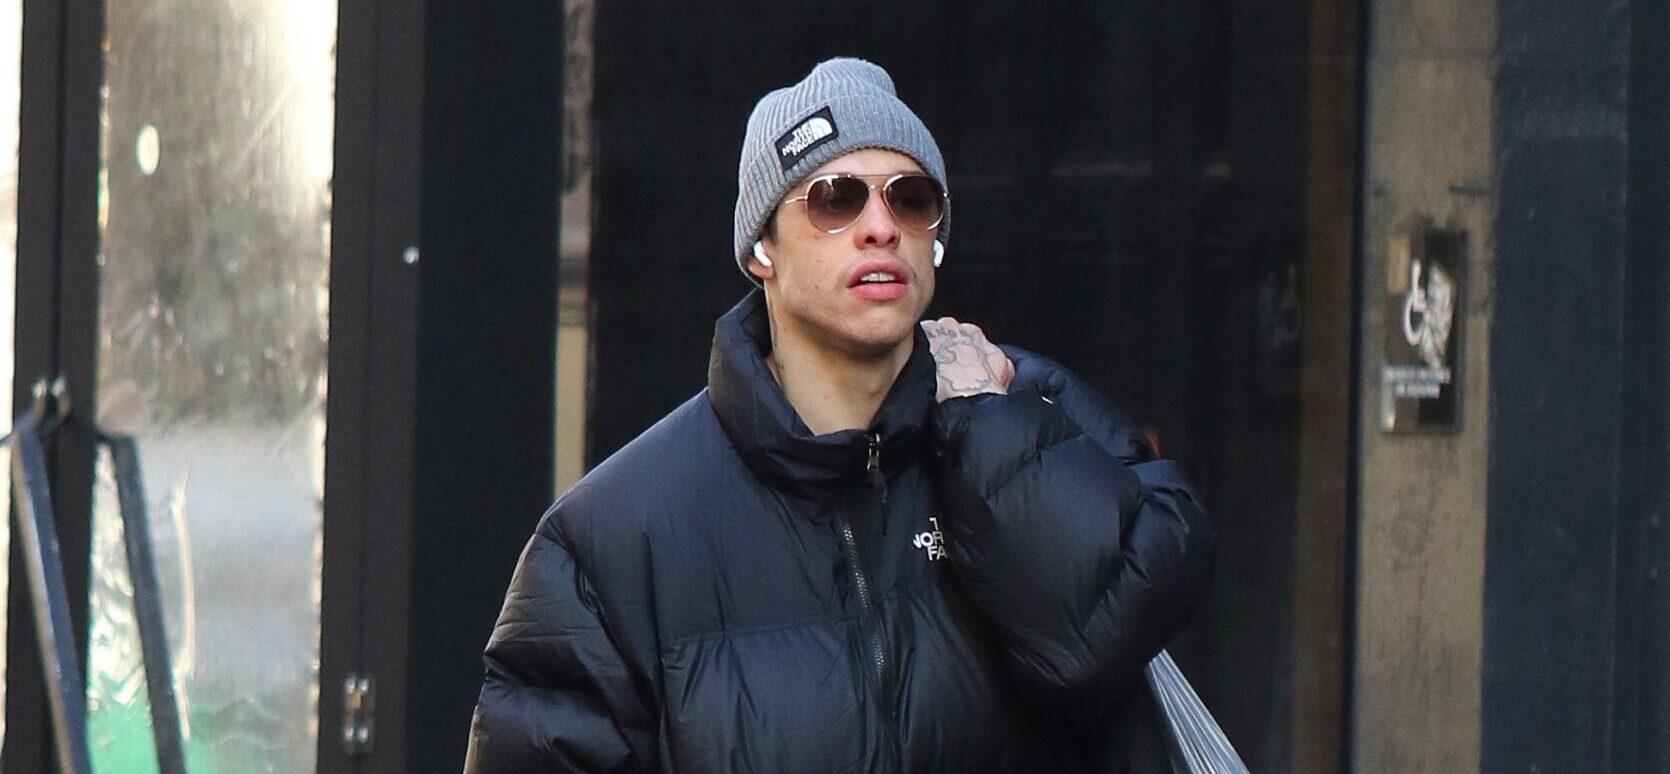 Pete Davidson Is Reportedly In Rehab After Struggling With Borderline Personality Disorder And PTSD